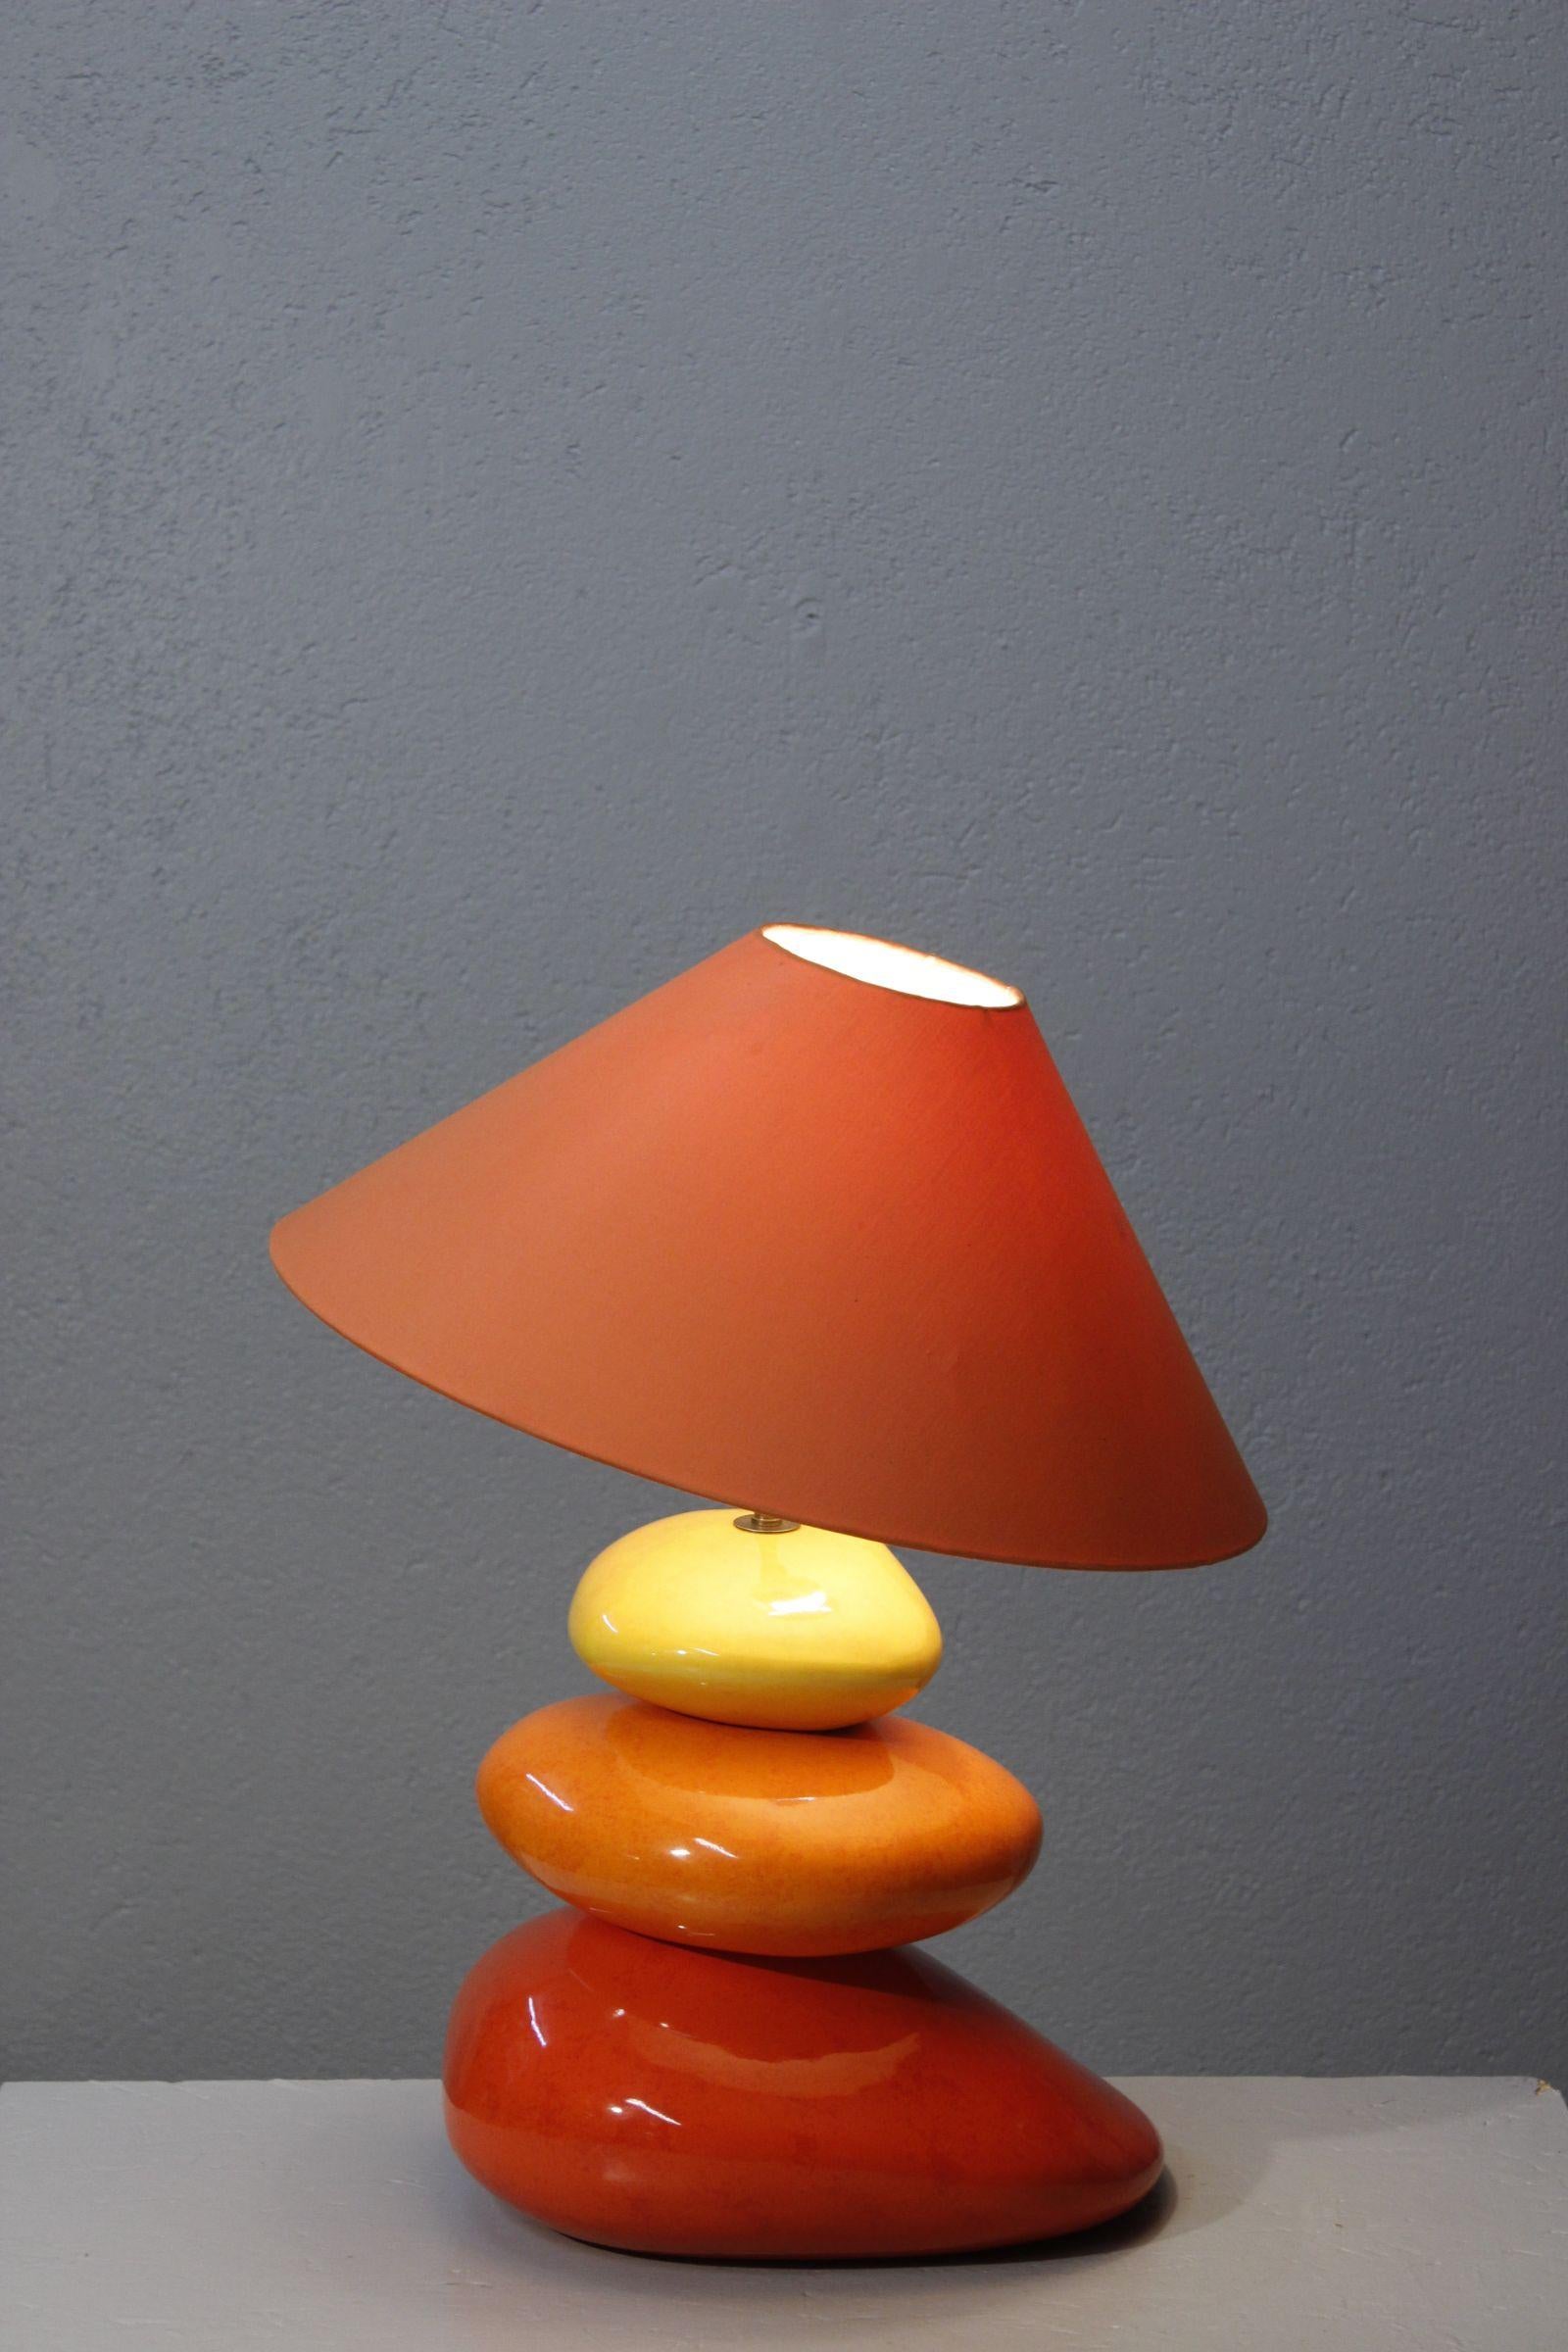 Large pebble lamp by François Chatain, France circa 1990. 

Composed of three glazed ceramic pebbles alternating between red, orange and yellow, surmounted by a brass rod housing the socket on a brass pivot allowing orientation of the shade.